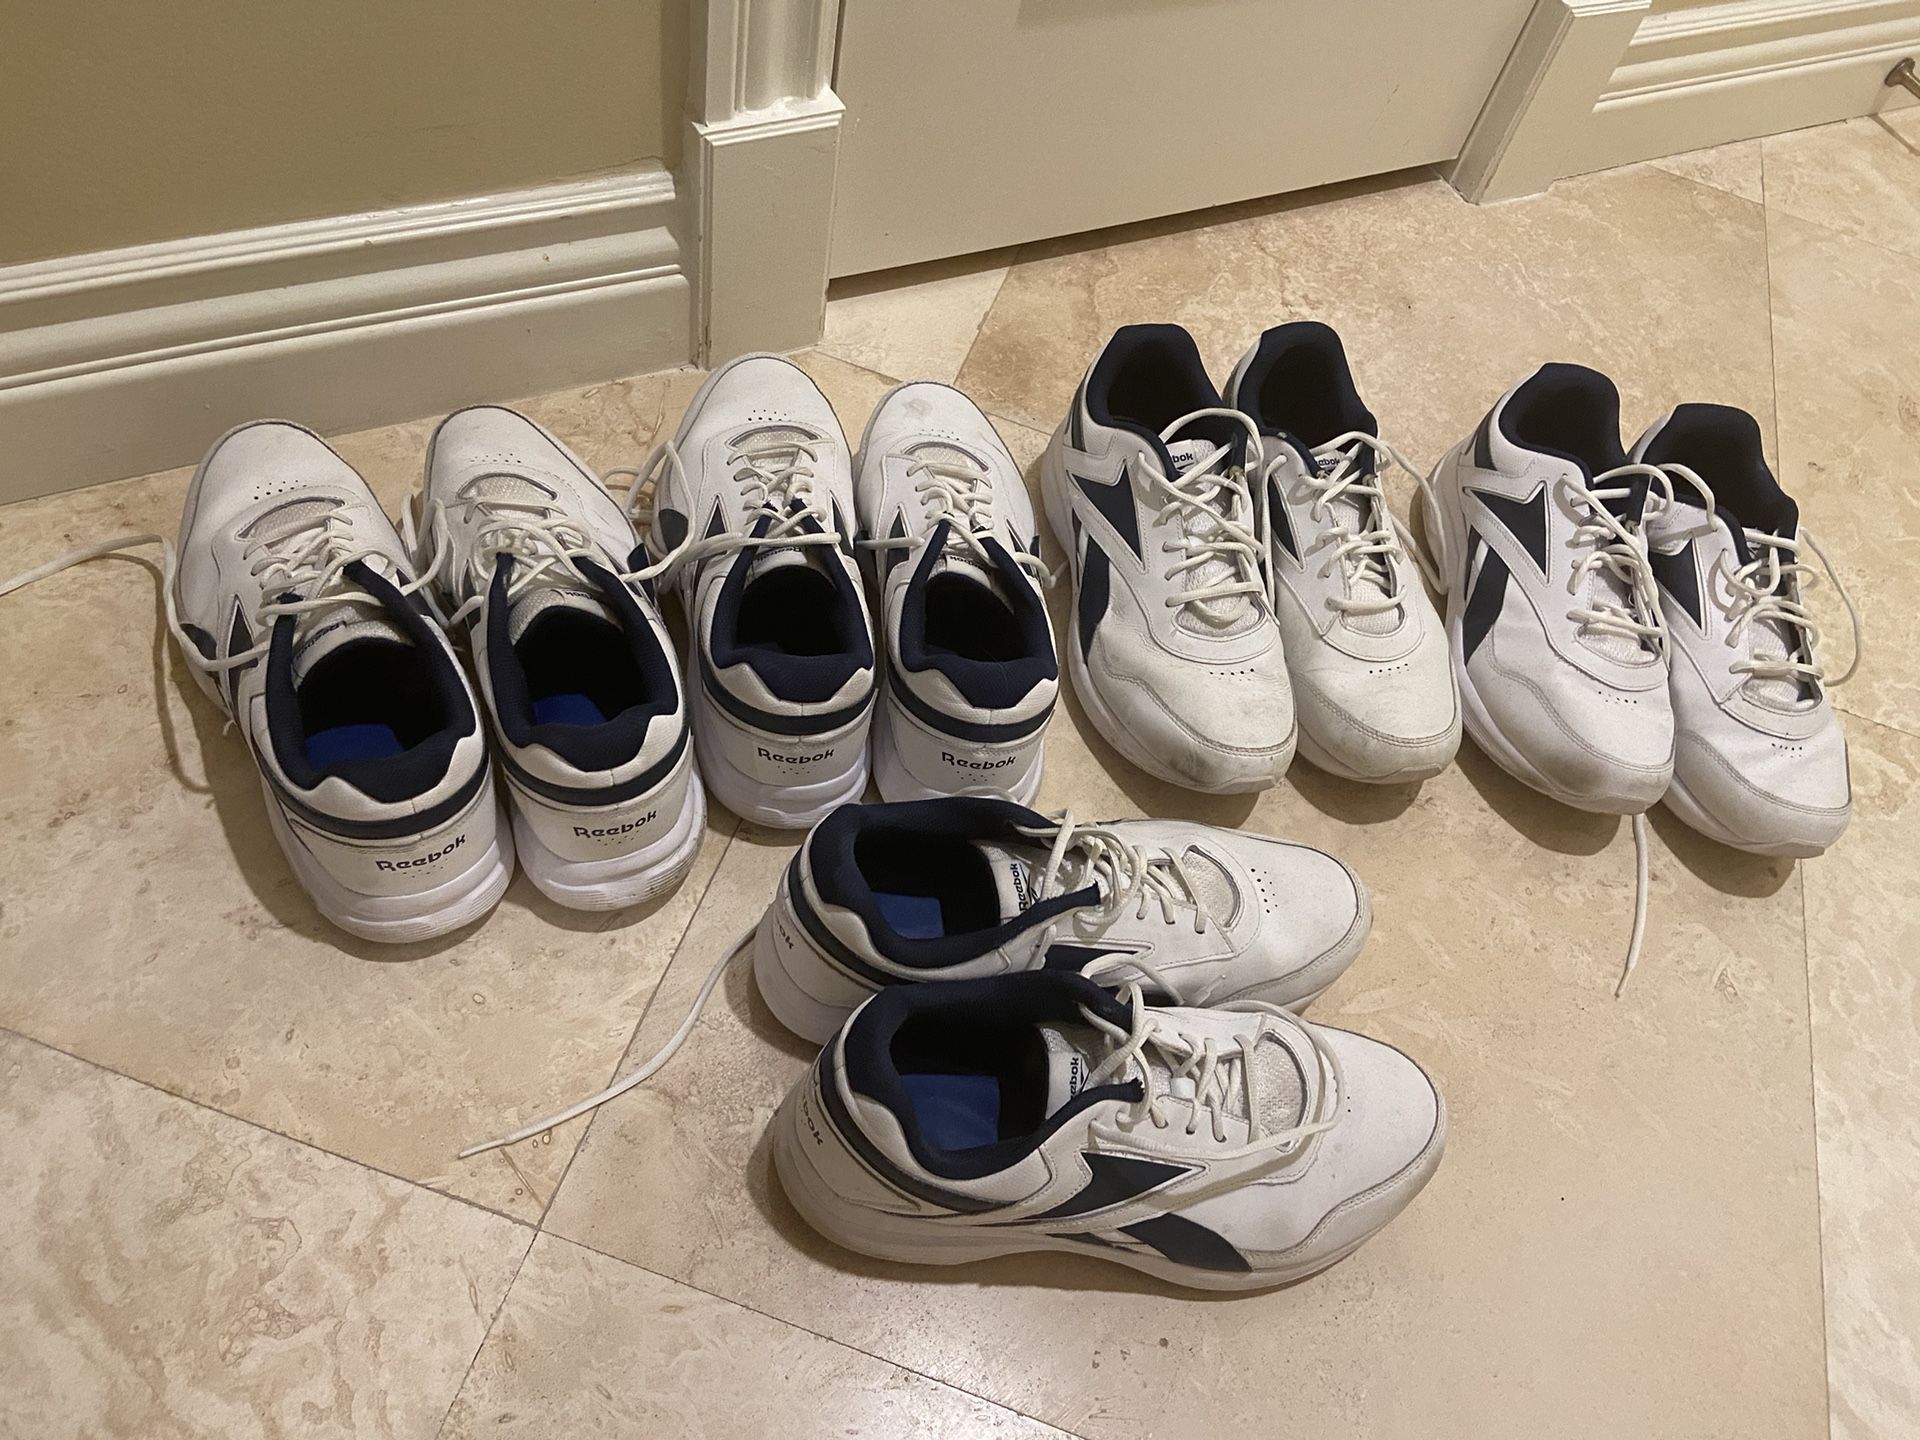 5 Pair of Reebok shoes Size 11.5  new condition.